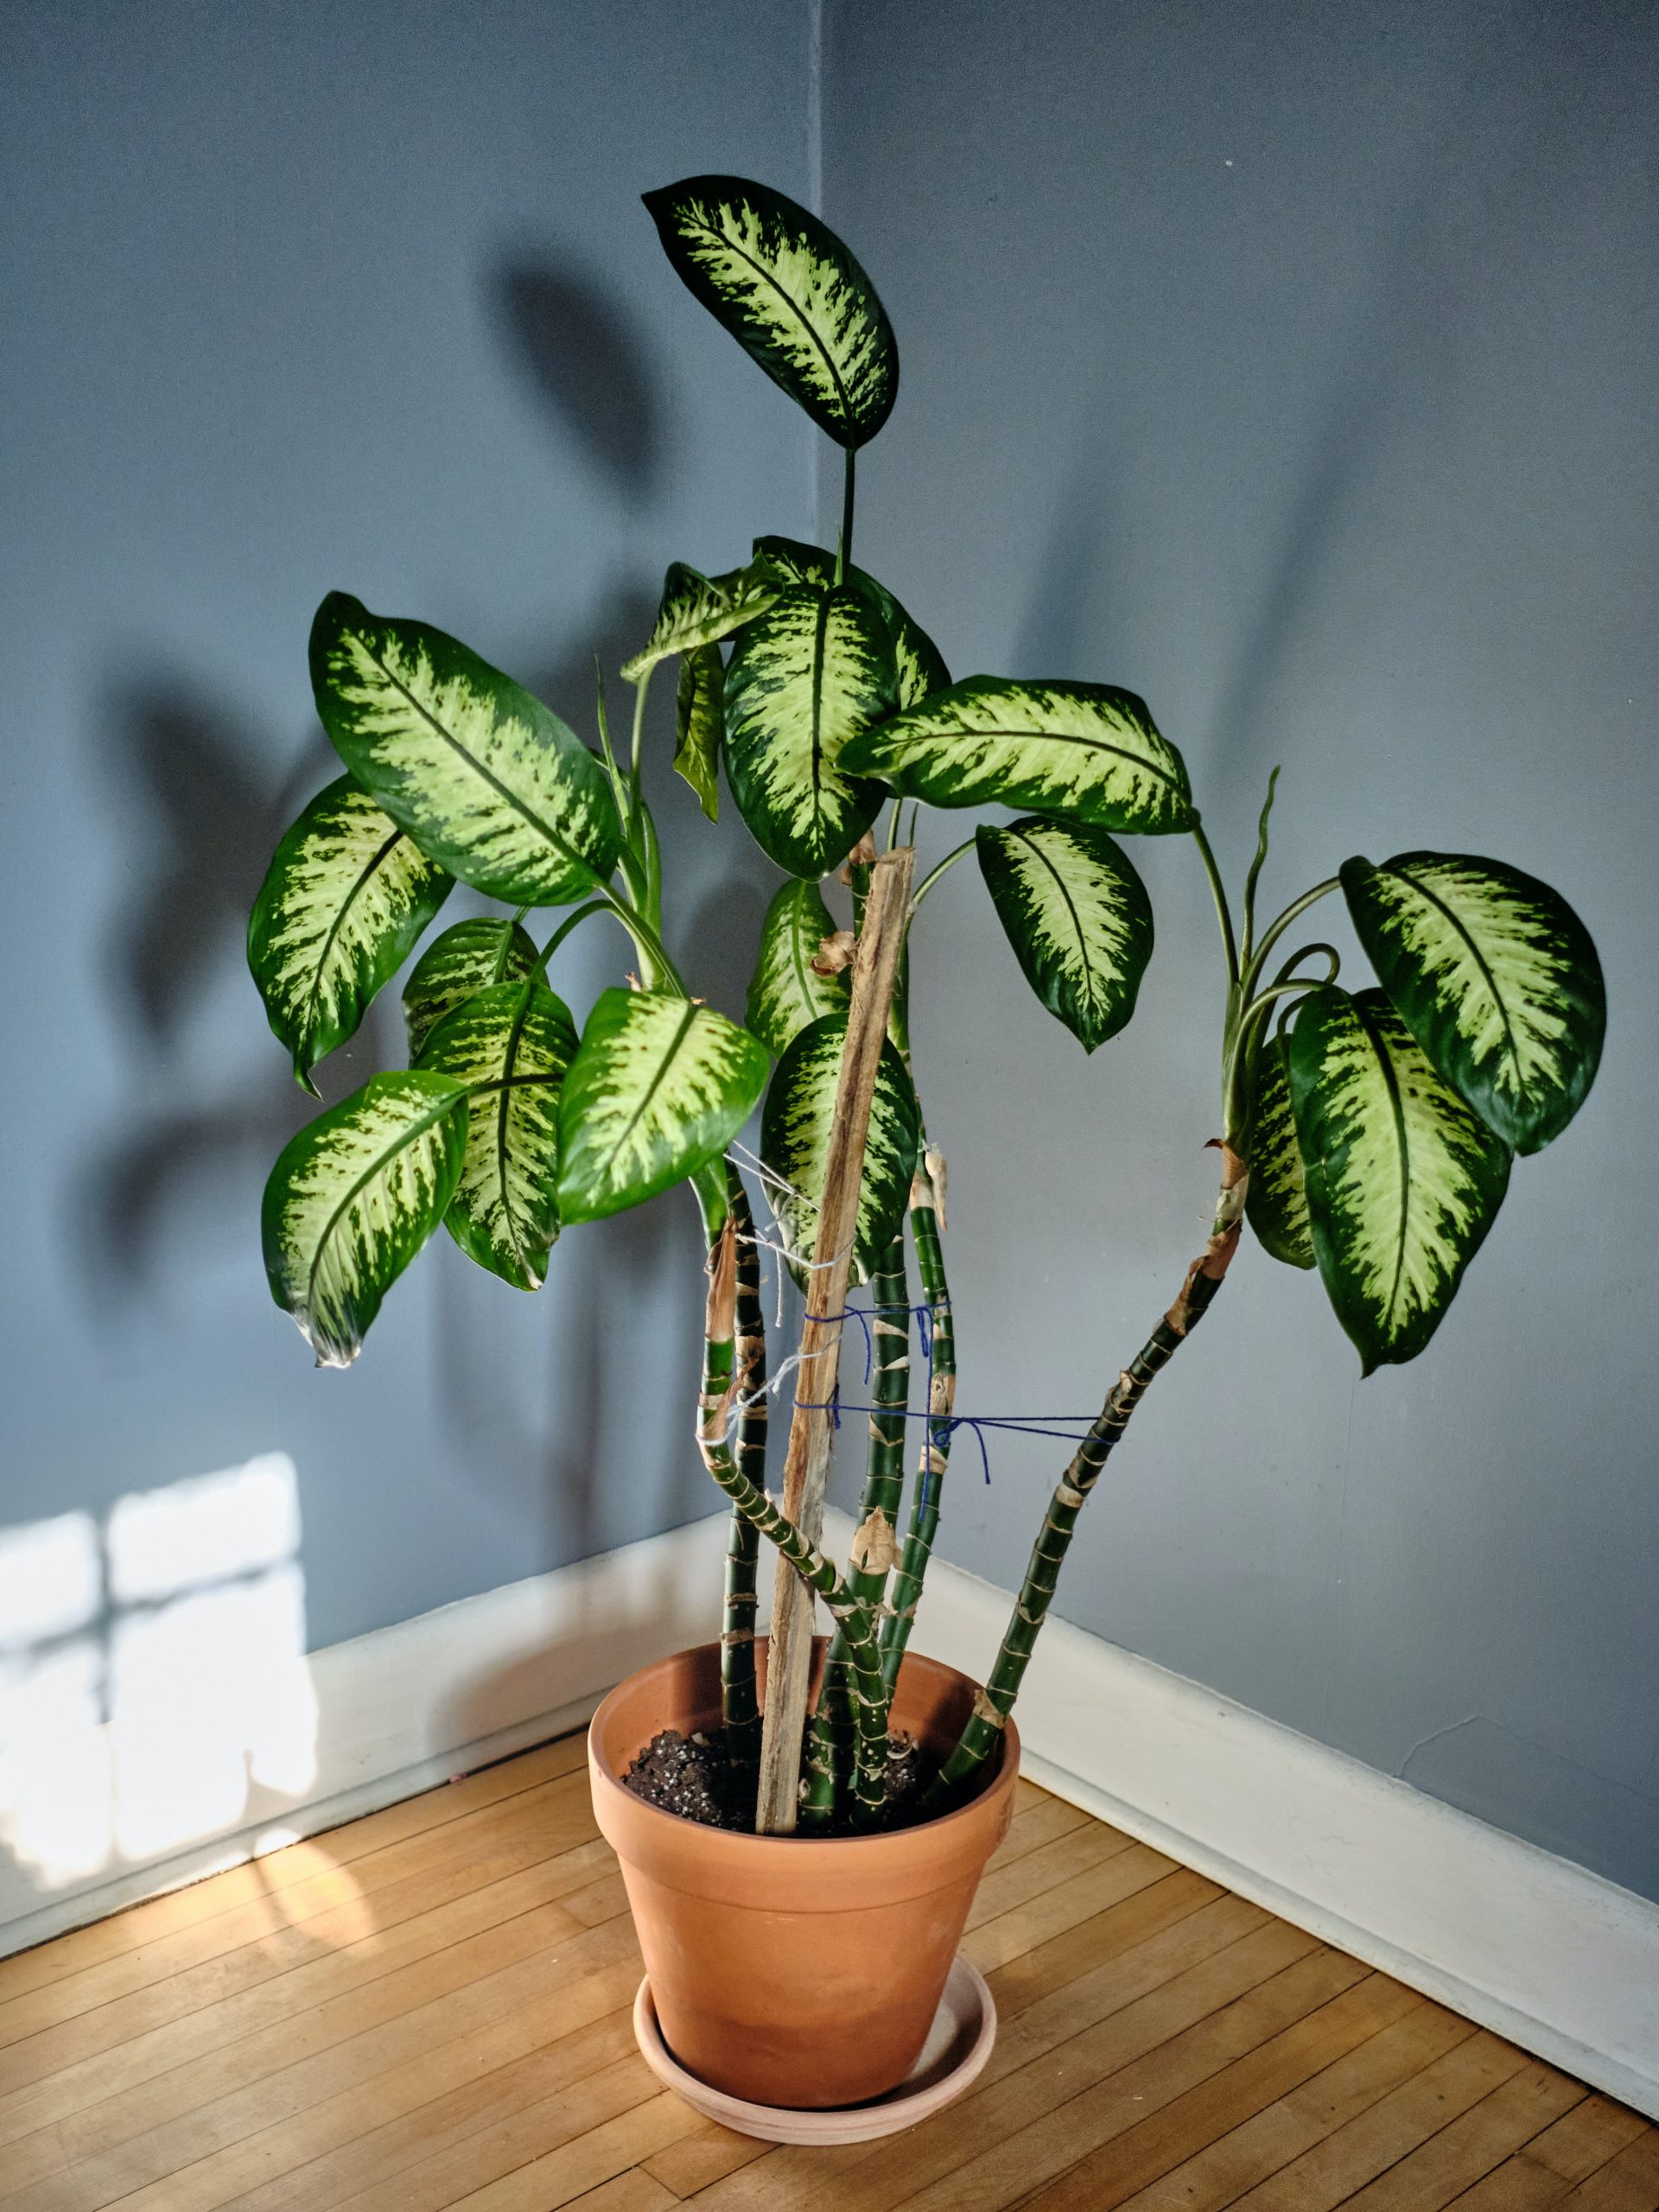 Why is my Dumb Cane / Dieffenbachia losing leaves?